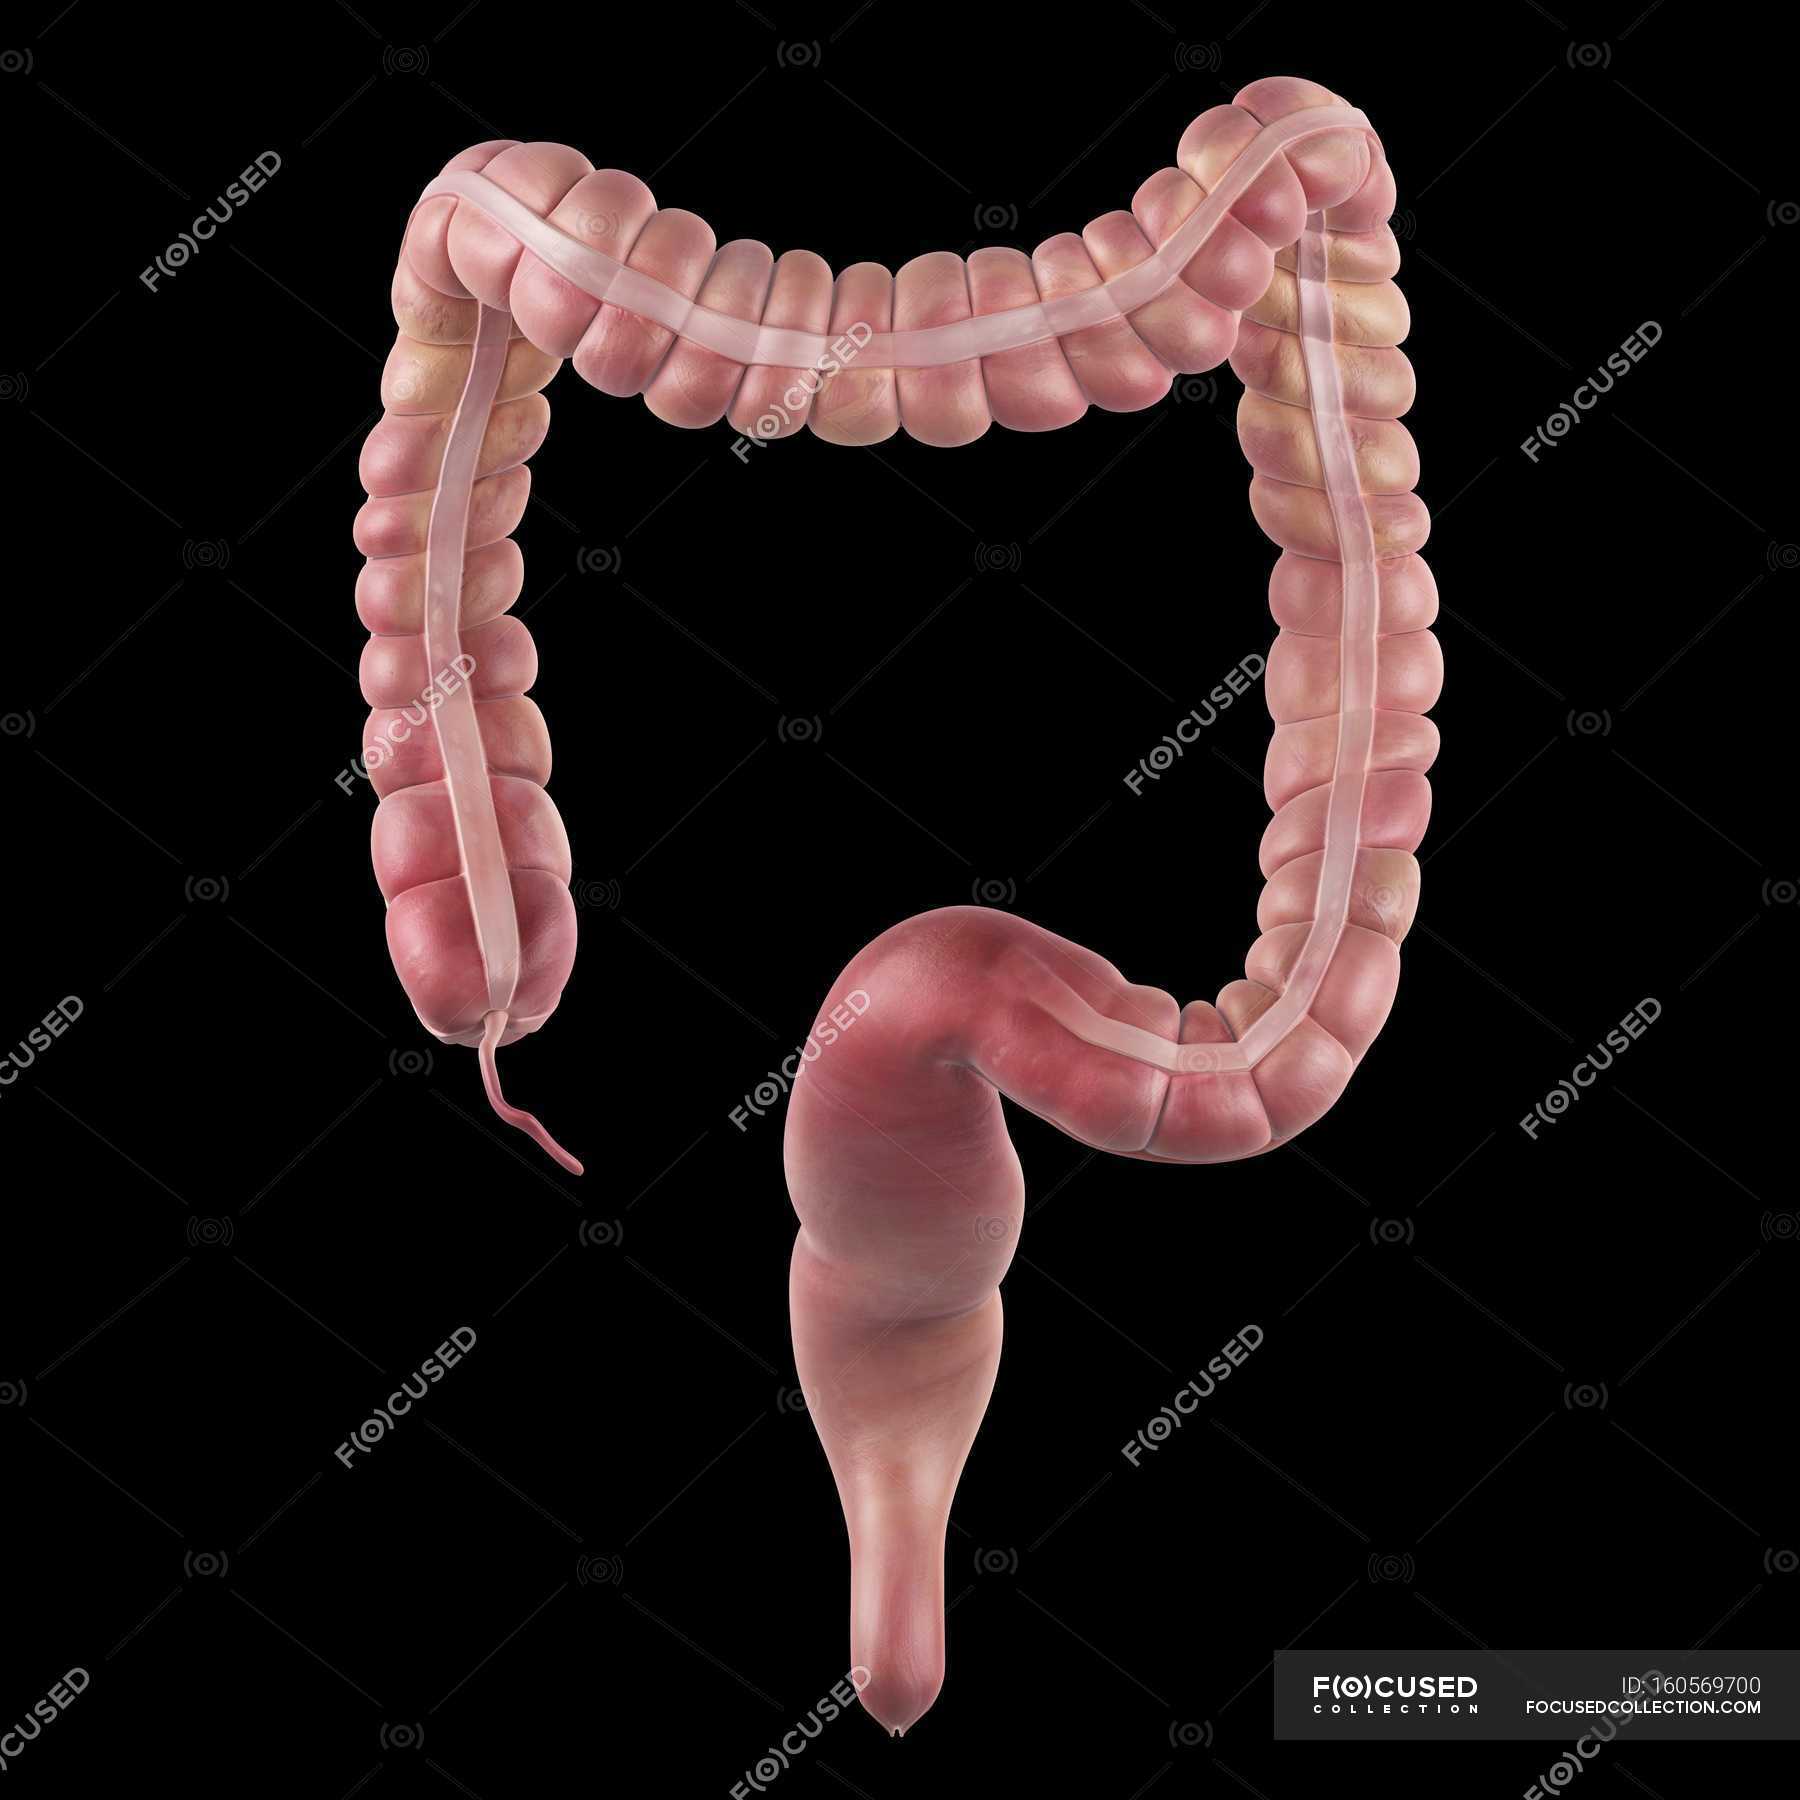 Large intestine Images - Search Images on Everypixel